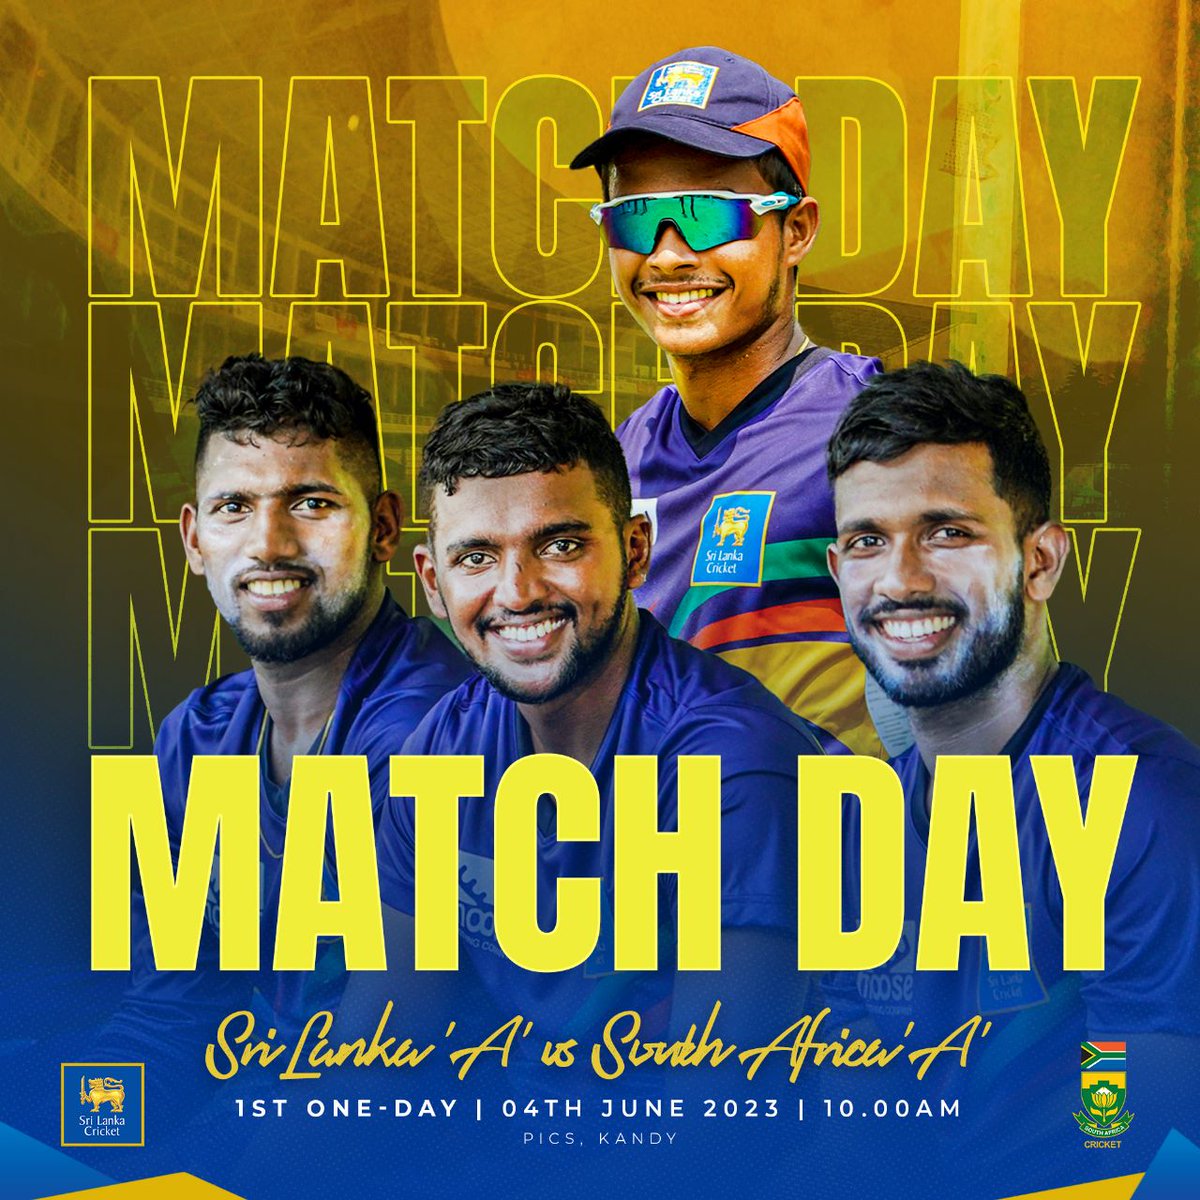 It's match day in Pallekele too! 🏏 Sri Lanka 'A' takes on South Africa 'A' in the 1st One day game at PICS, Kandy. ⏰ The game starts at 10 AM. 🙌

#SLvSA #SLATeam